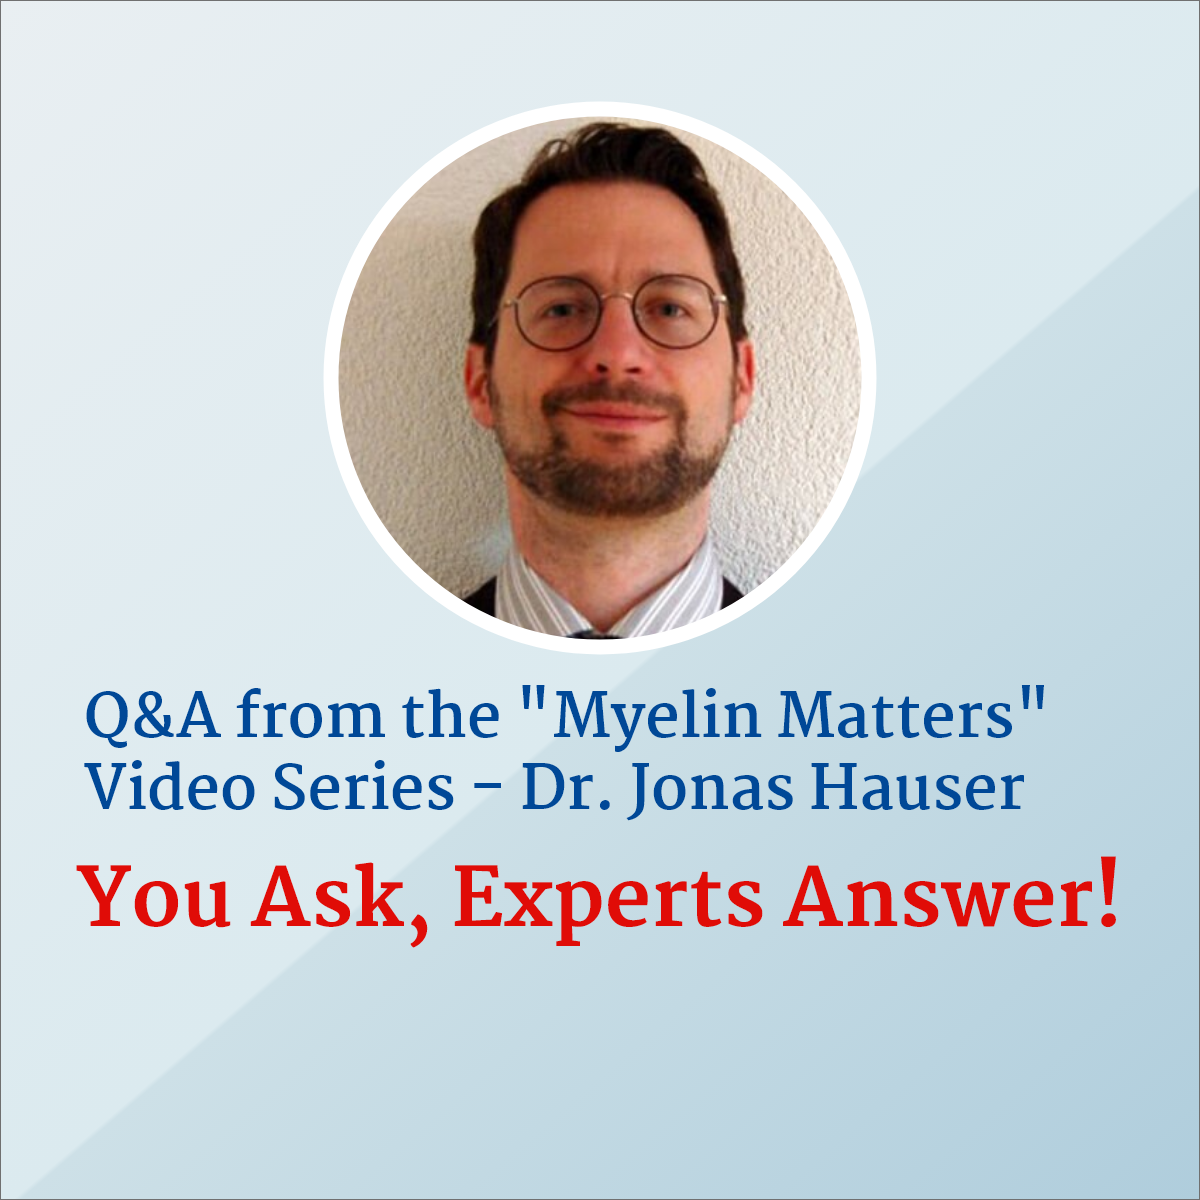 Q&A from the "Myelin Matters" Video Series - Dr. Jonas Hauser